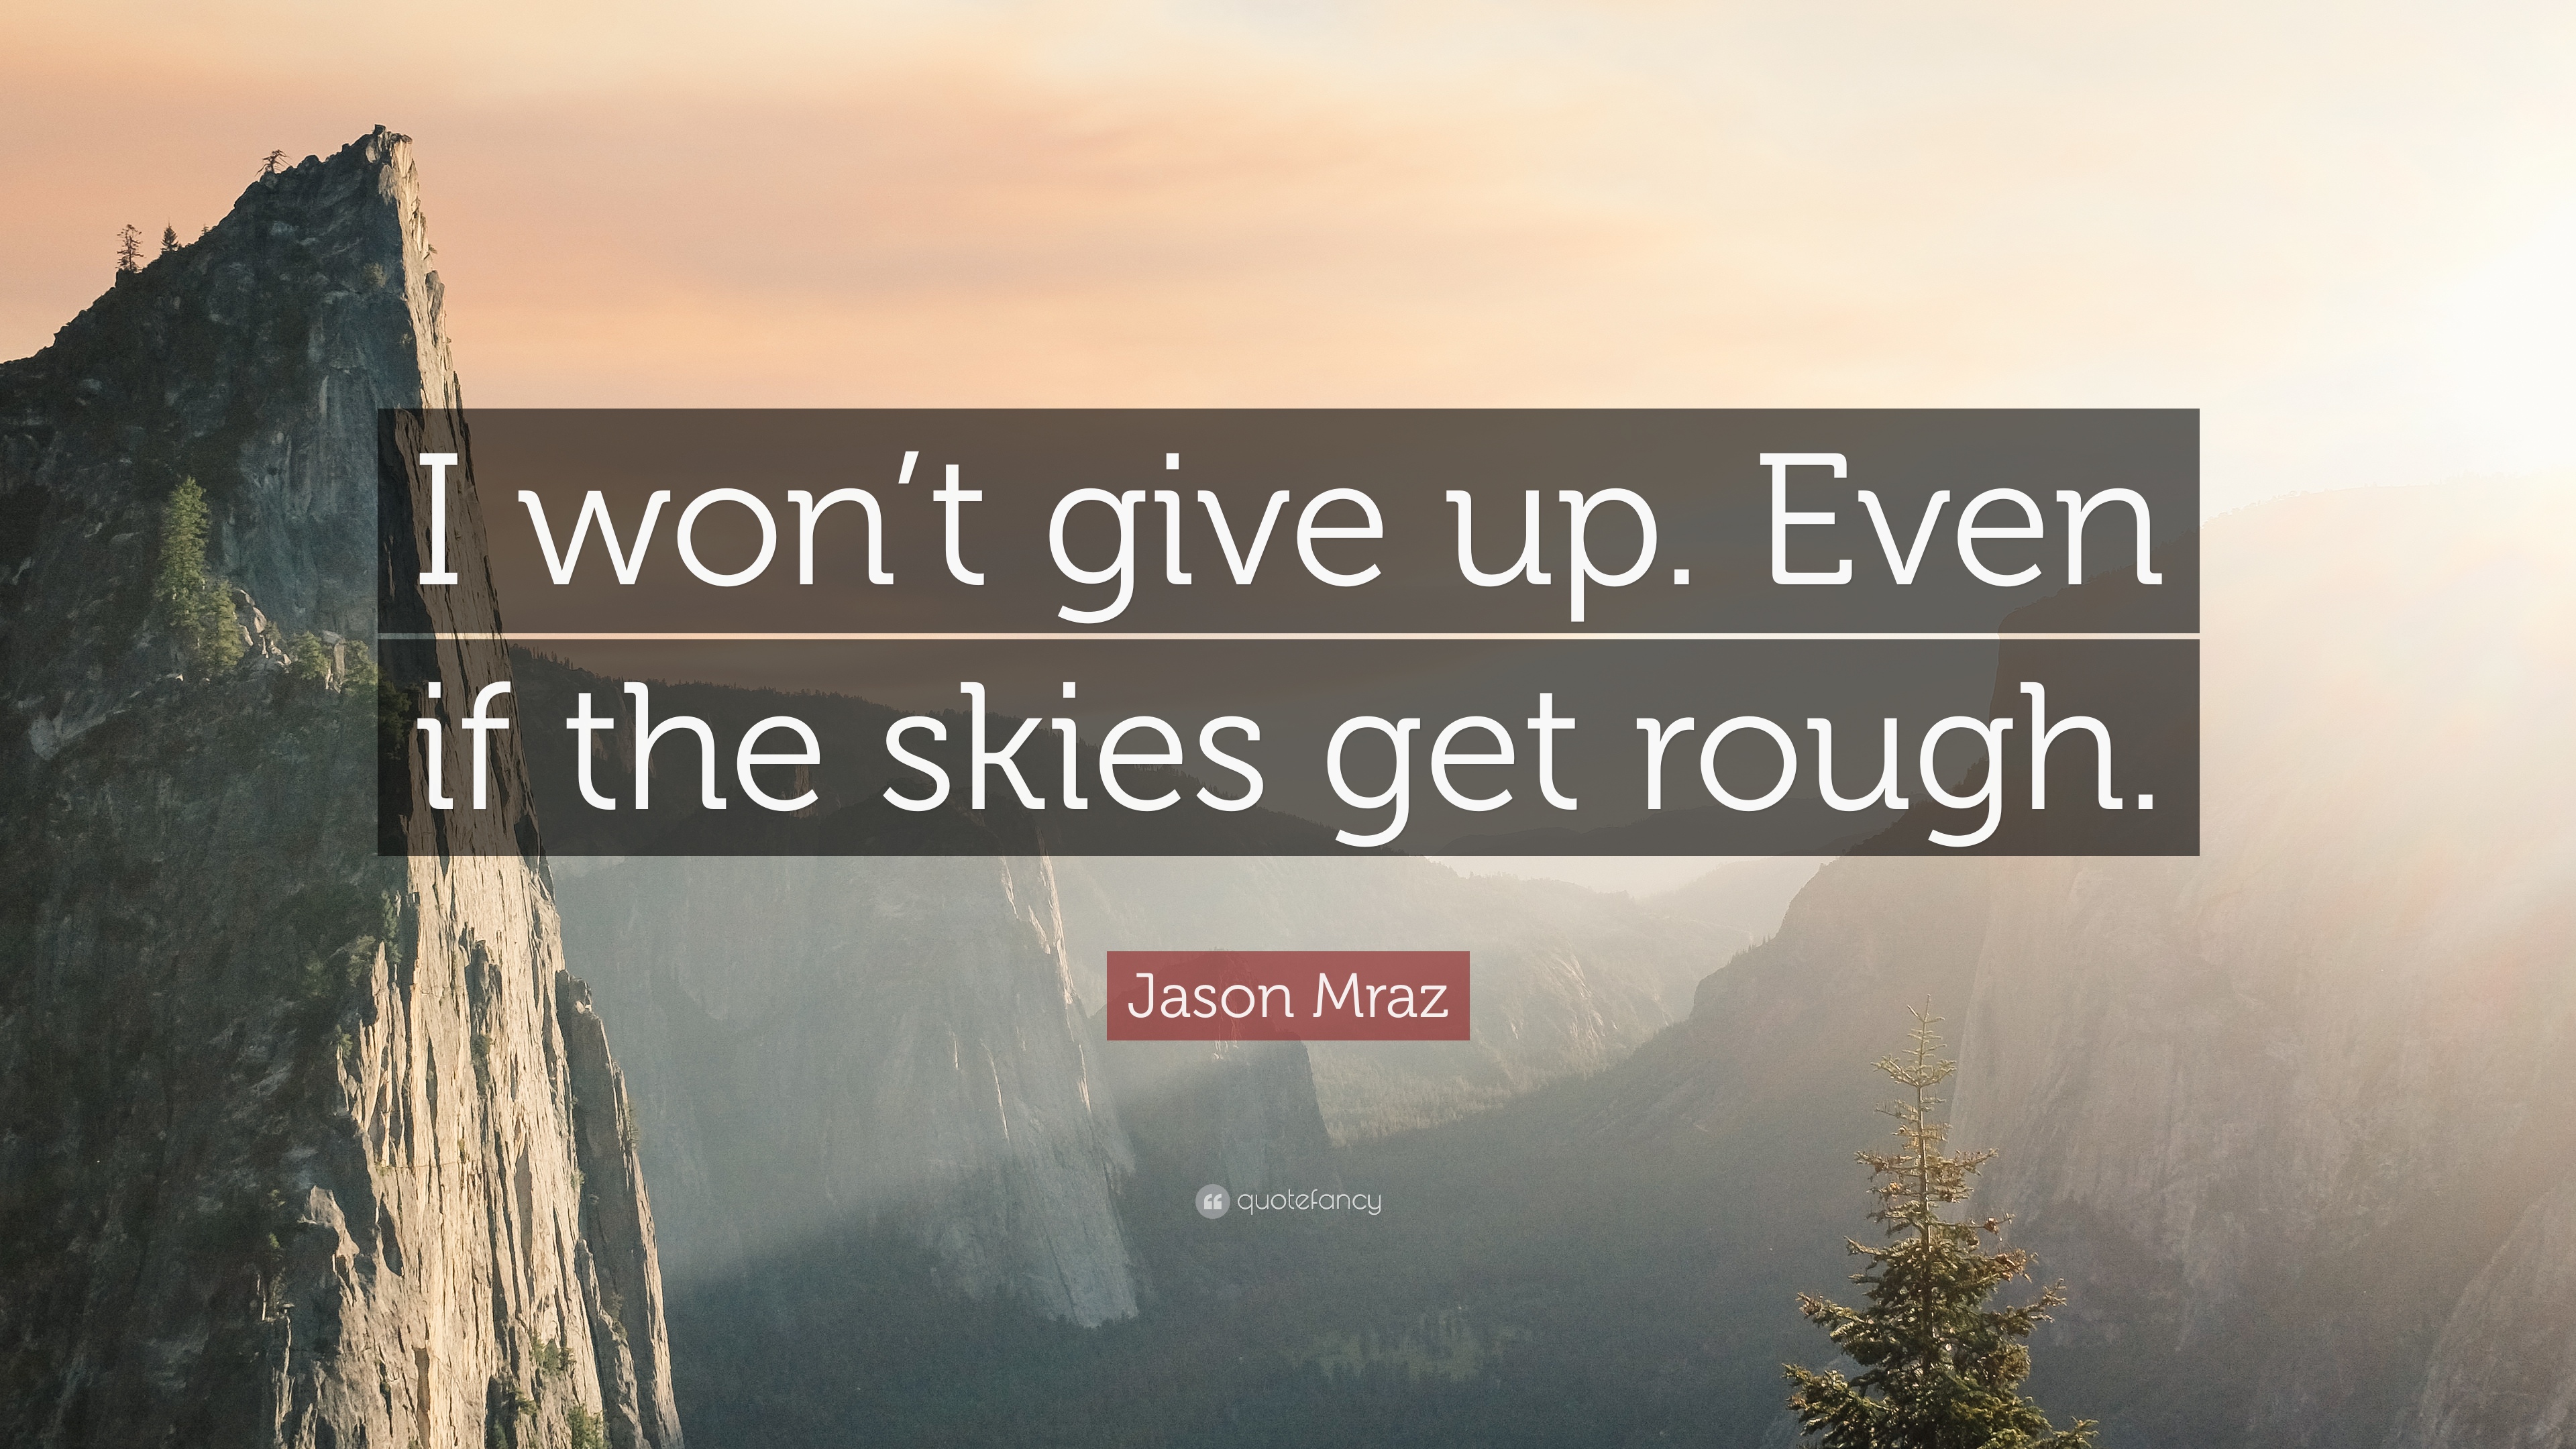 274569-Jason-Mraz-Quote-I-won-t-give-up-Even-if-the-skies-get-rough.jpg